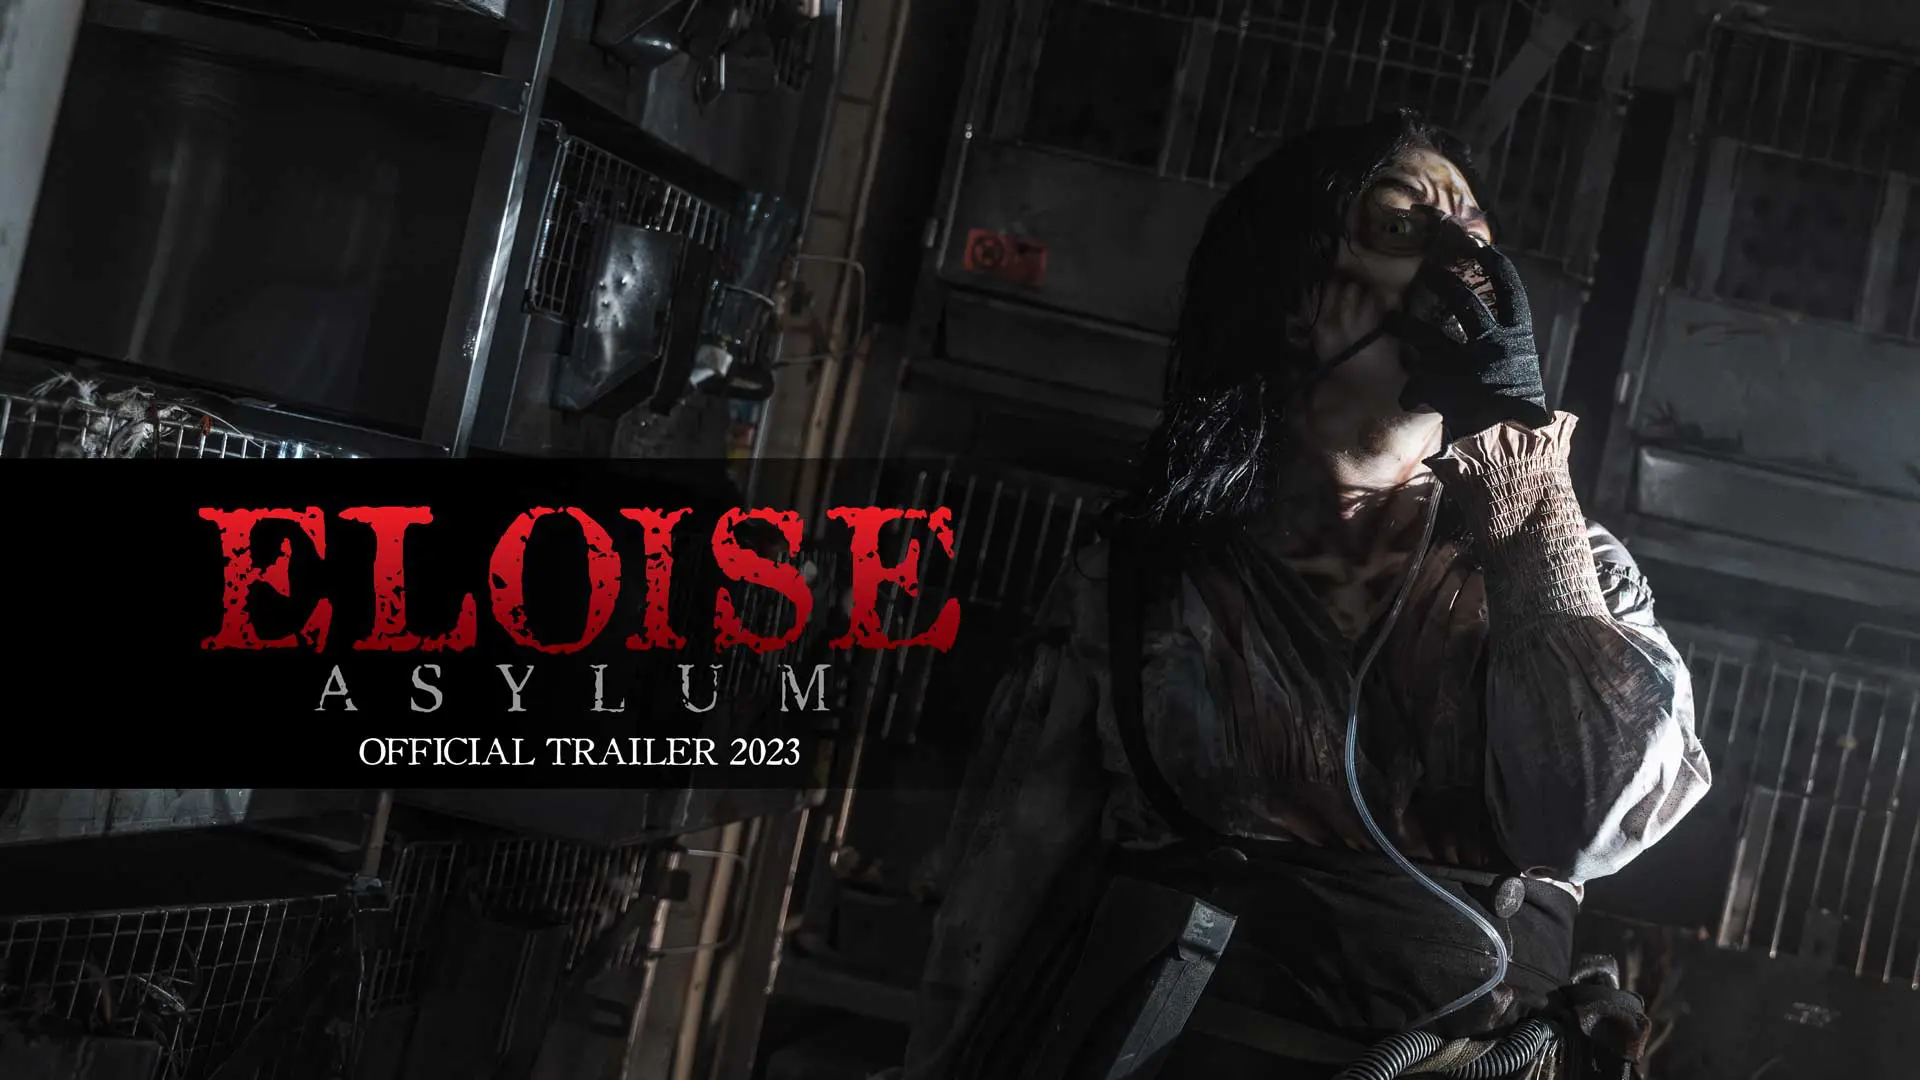 Watch the Eloise Asylum Trailer created by Rogues Hollow Productions